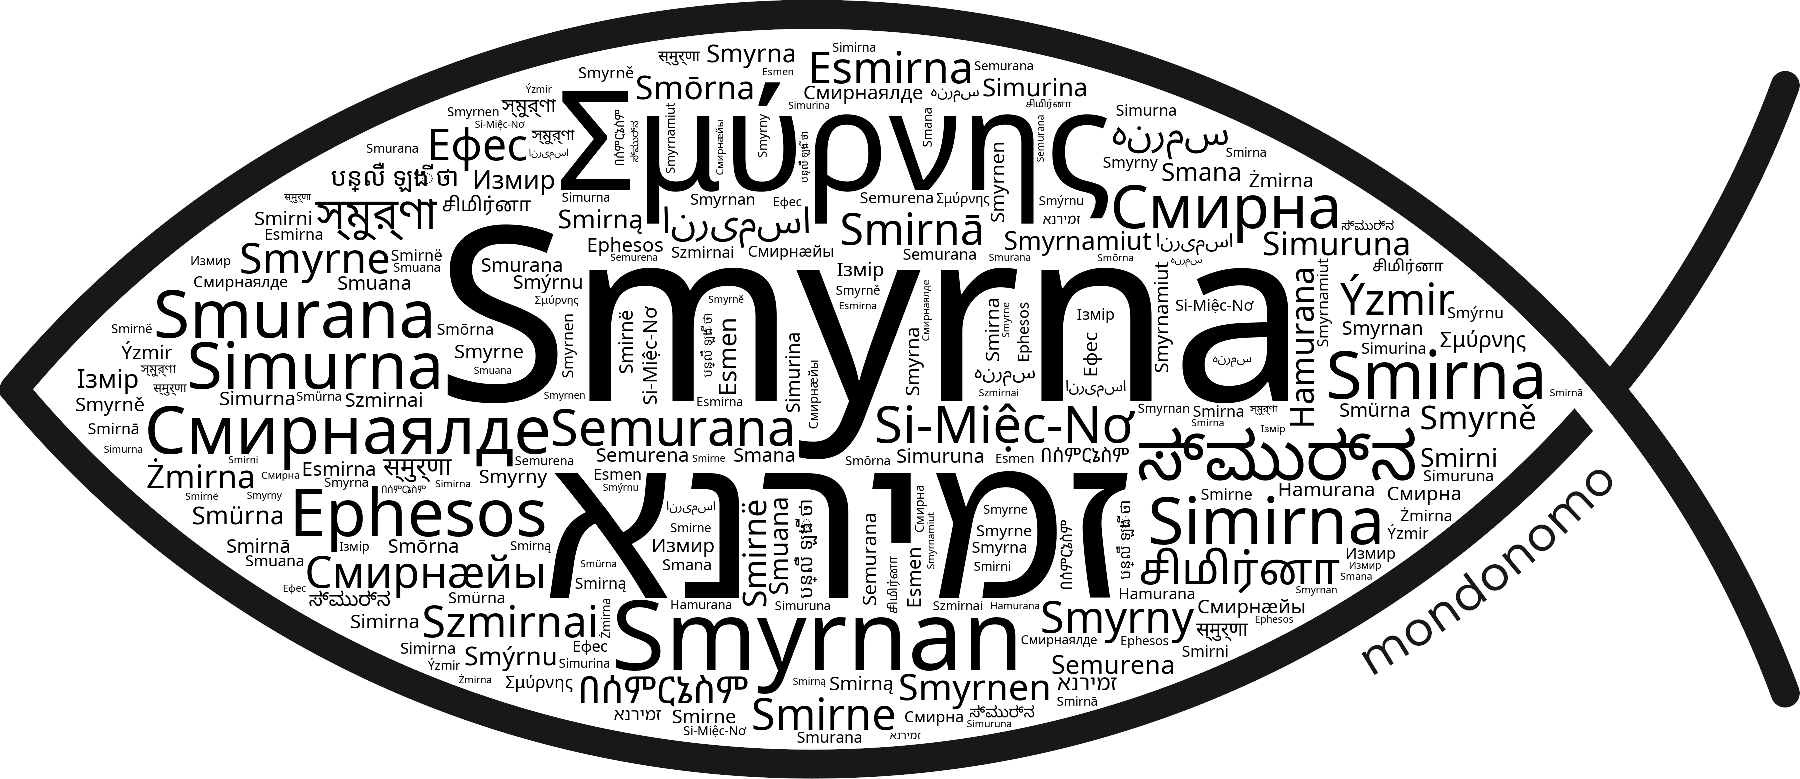 Name Smyrna in the world's Bibles